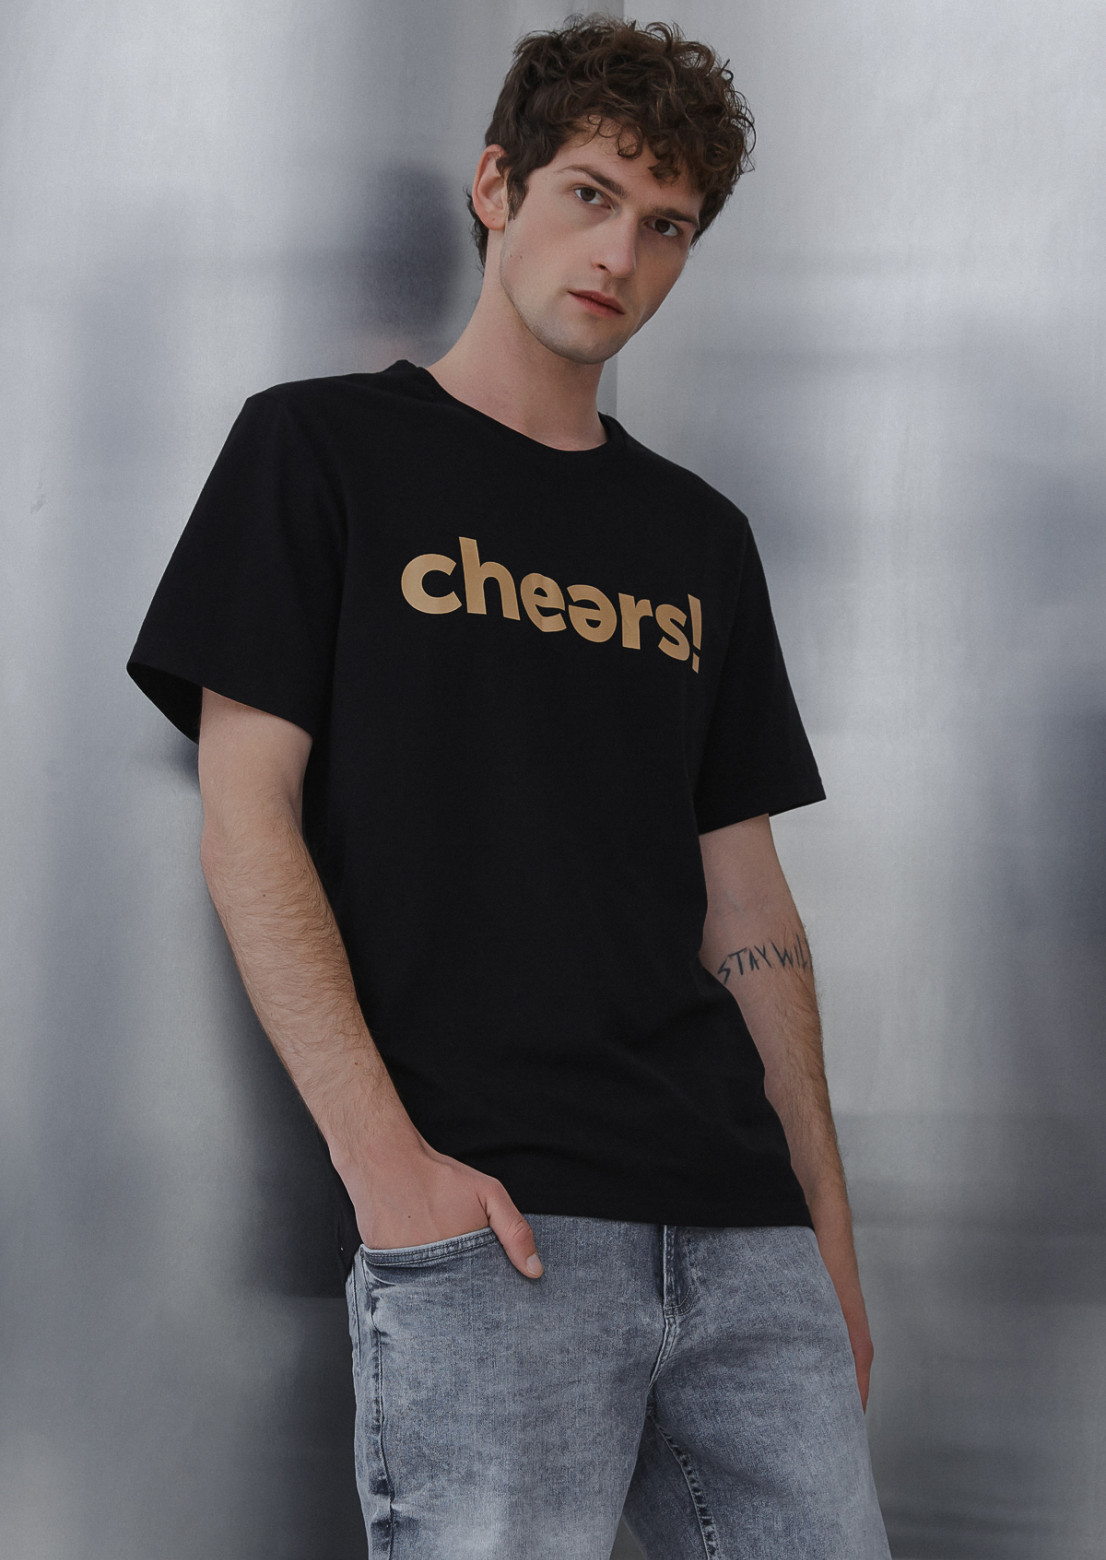 Men's black color T-shirt with print "Cheers" 